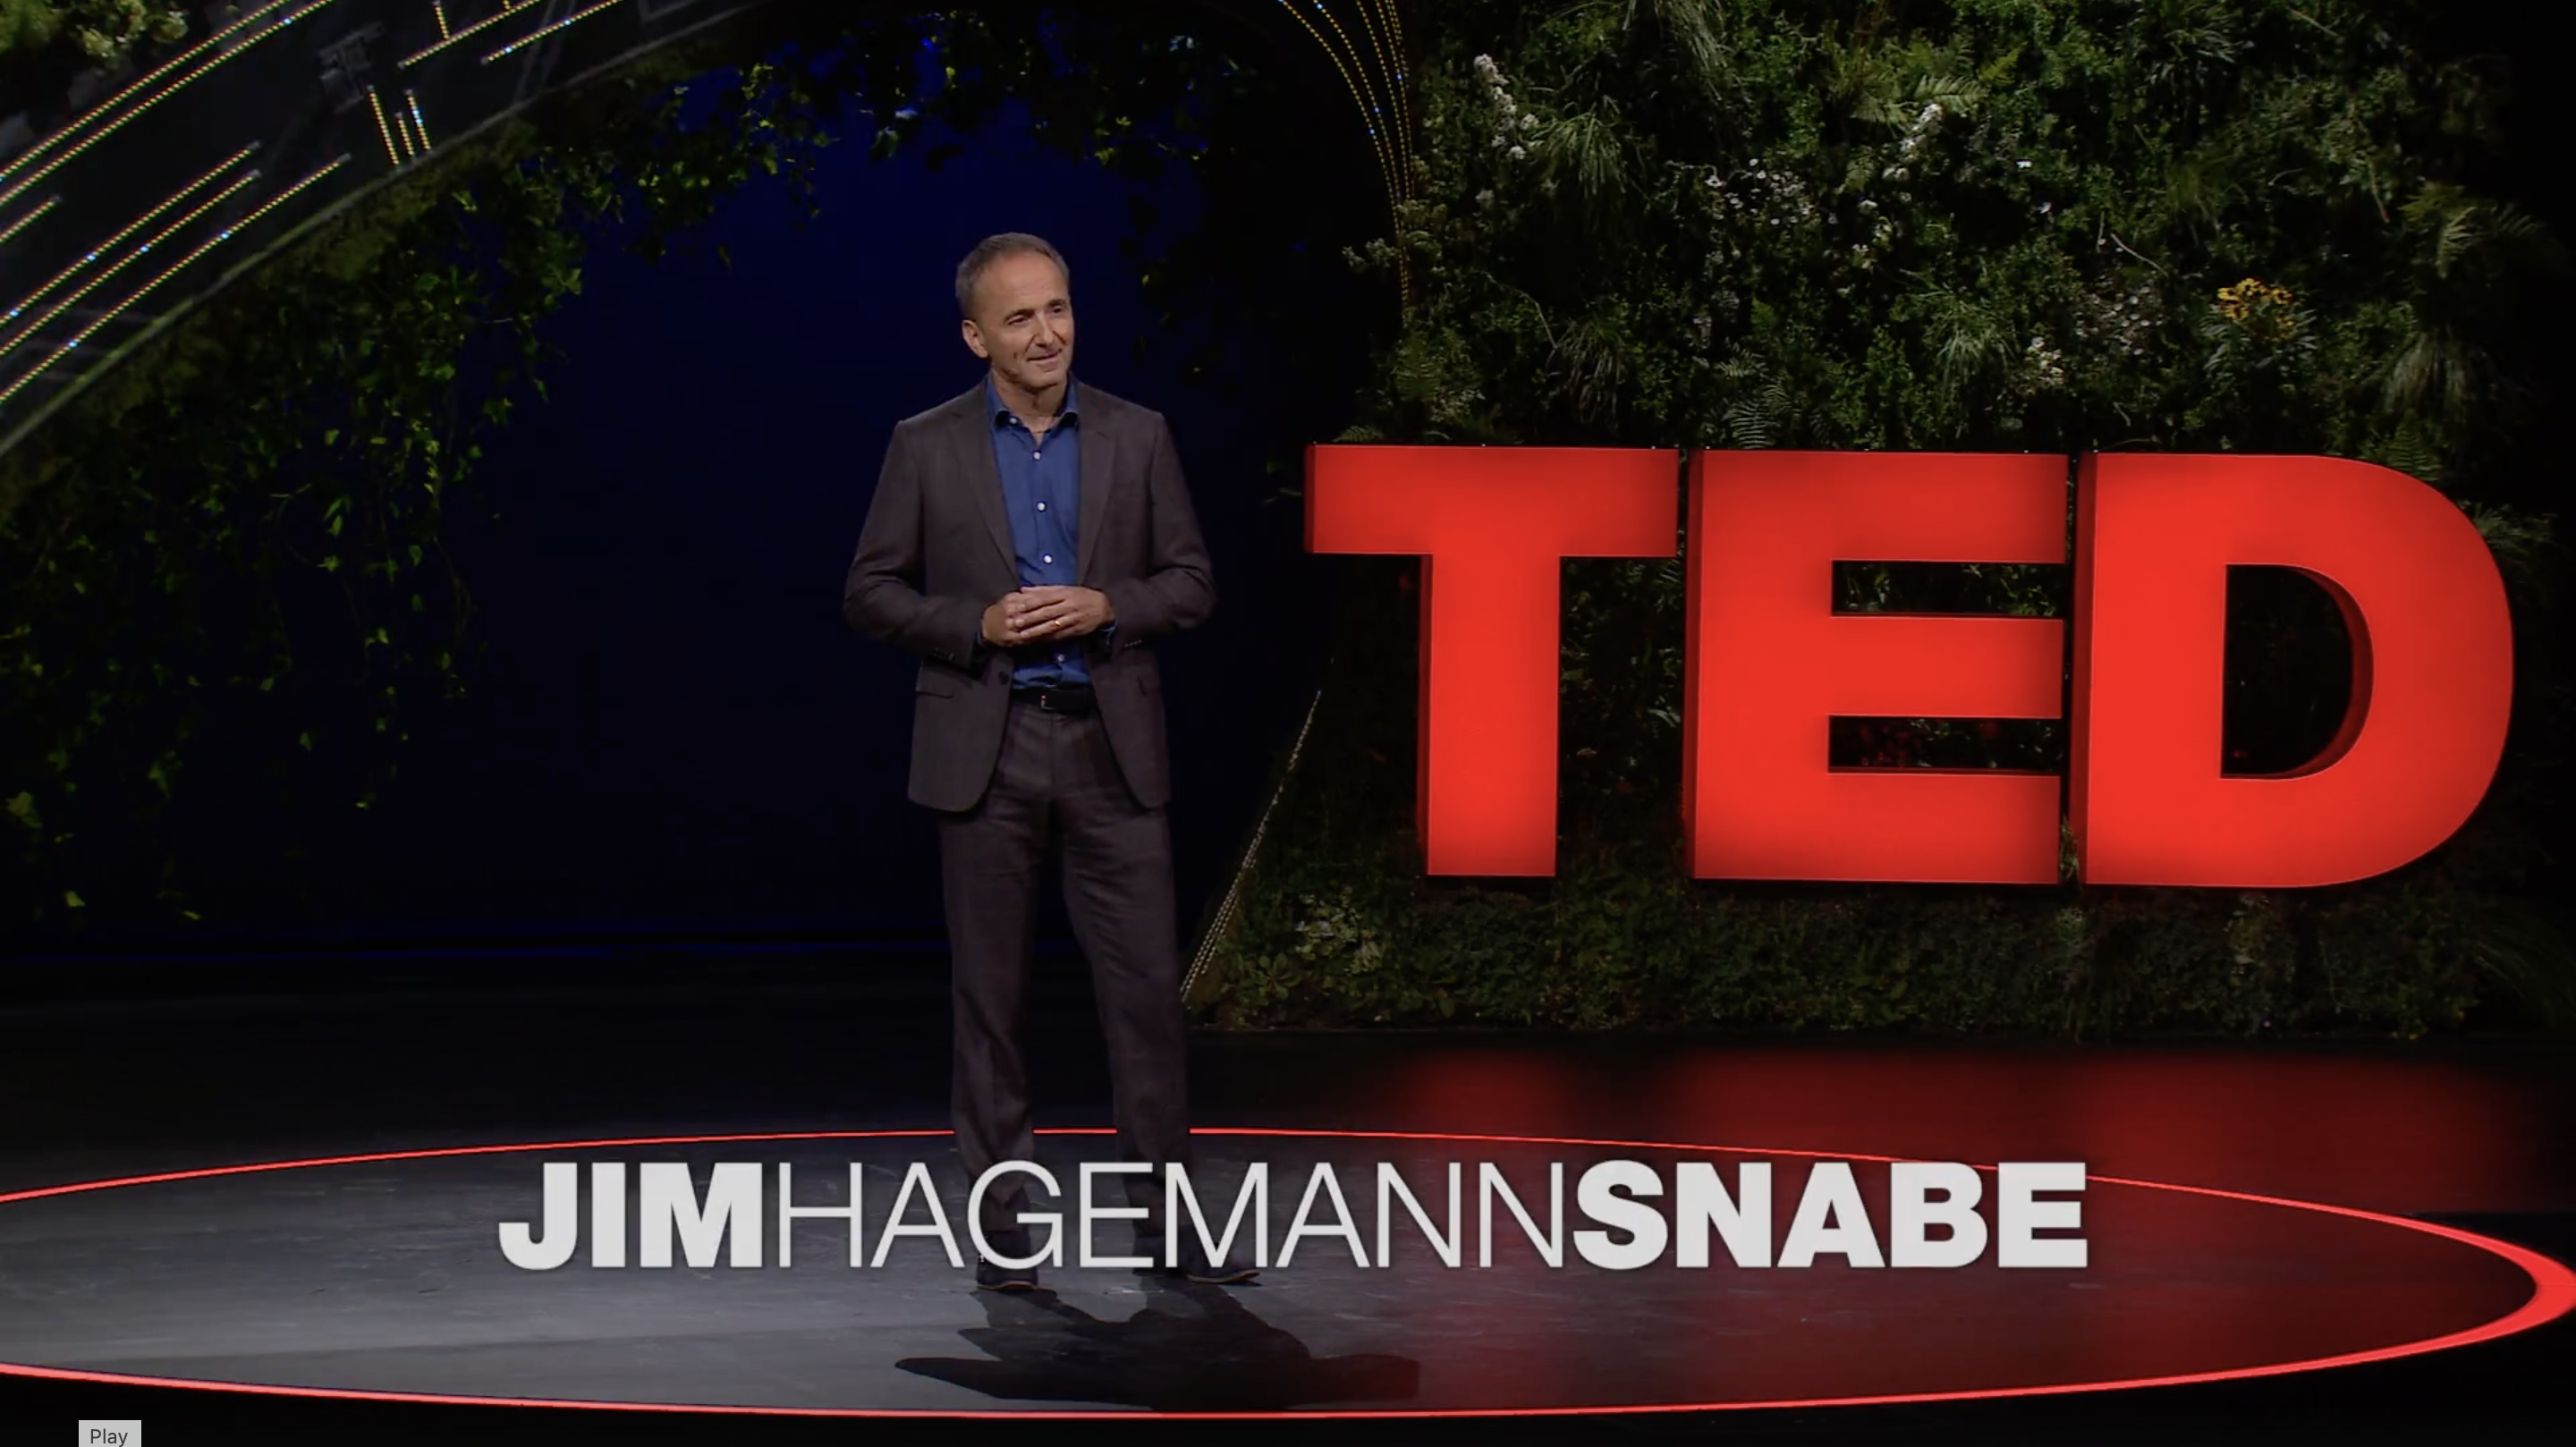 You are currently viewing Dreams and Details for a Decarbonised Future | Jim Hagemann Snabe | TED Talk